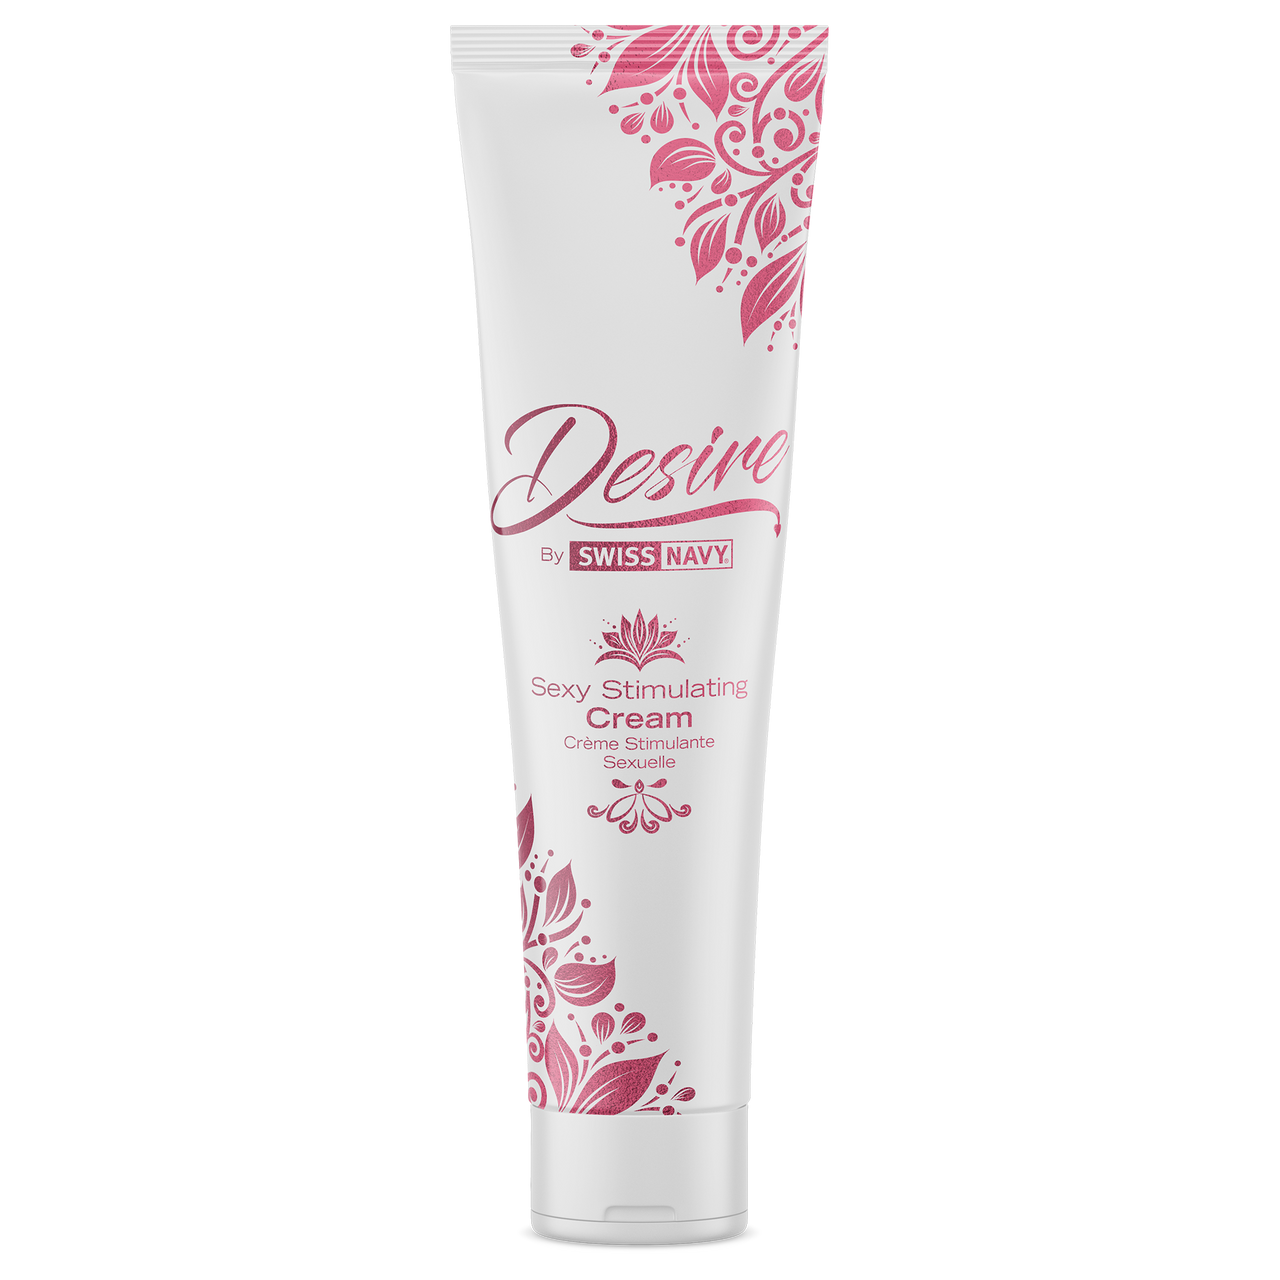  BUY Swiss Navy | Desire Sexy Stimulating Cream 2oz Duchess and Daisy Australia Desire by Swiss Navy’s Sexy Stimulating Cream creates physical excitement with fresh, tingling sensations.  Sexy is a mindset and a feeling. Lovingly apply the creamy, rich formula onto your clitoris to thrill your senses as you become flush with desire.